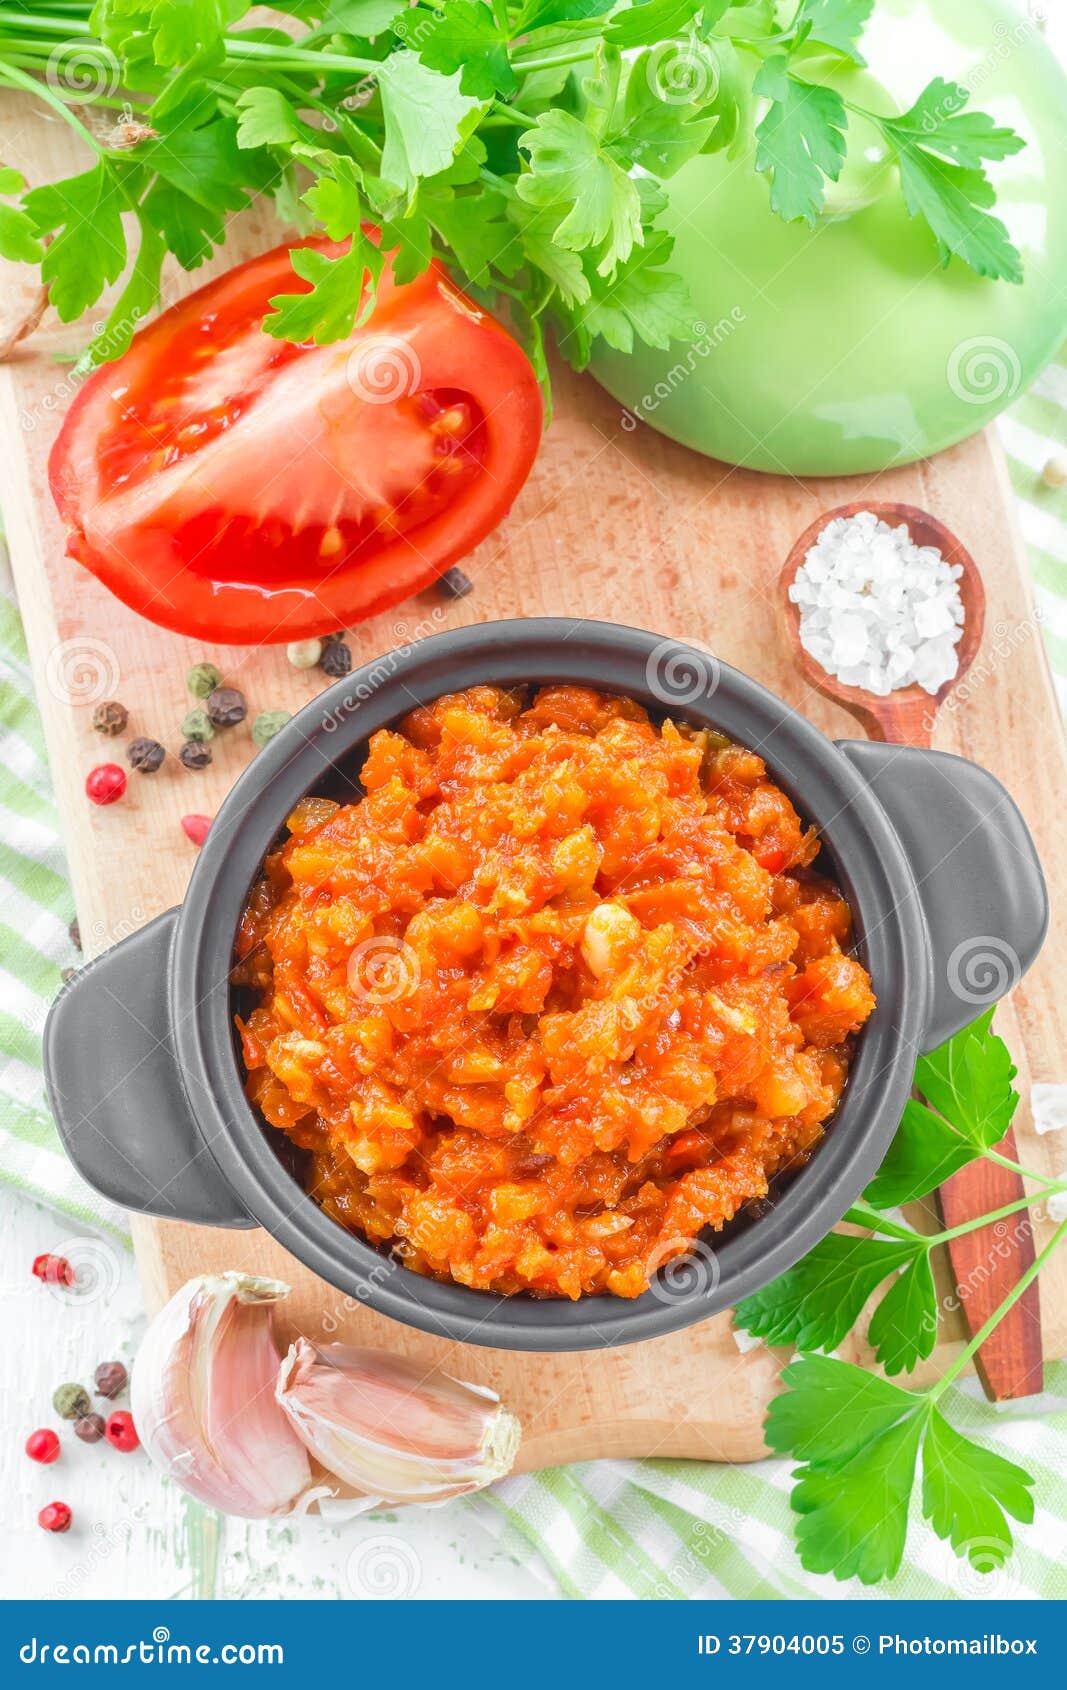 Sauce salsa in a bowl on a wooden table